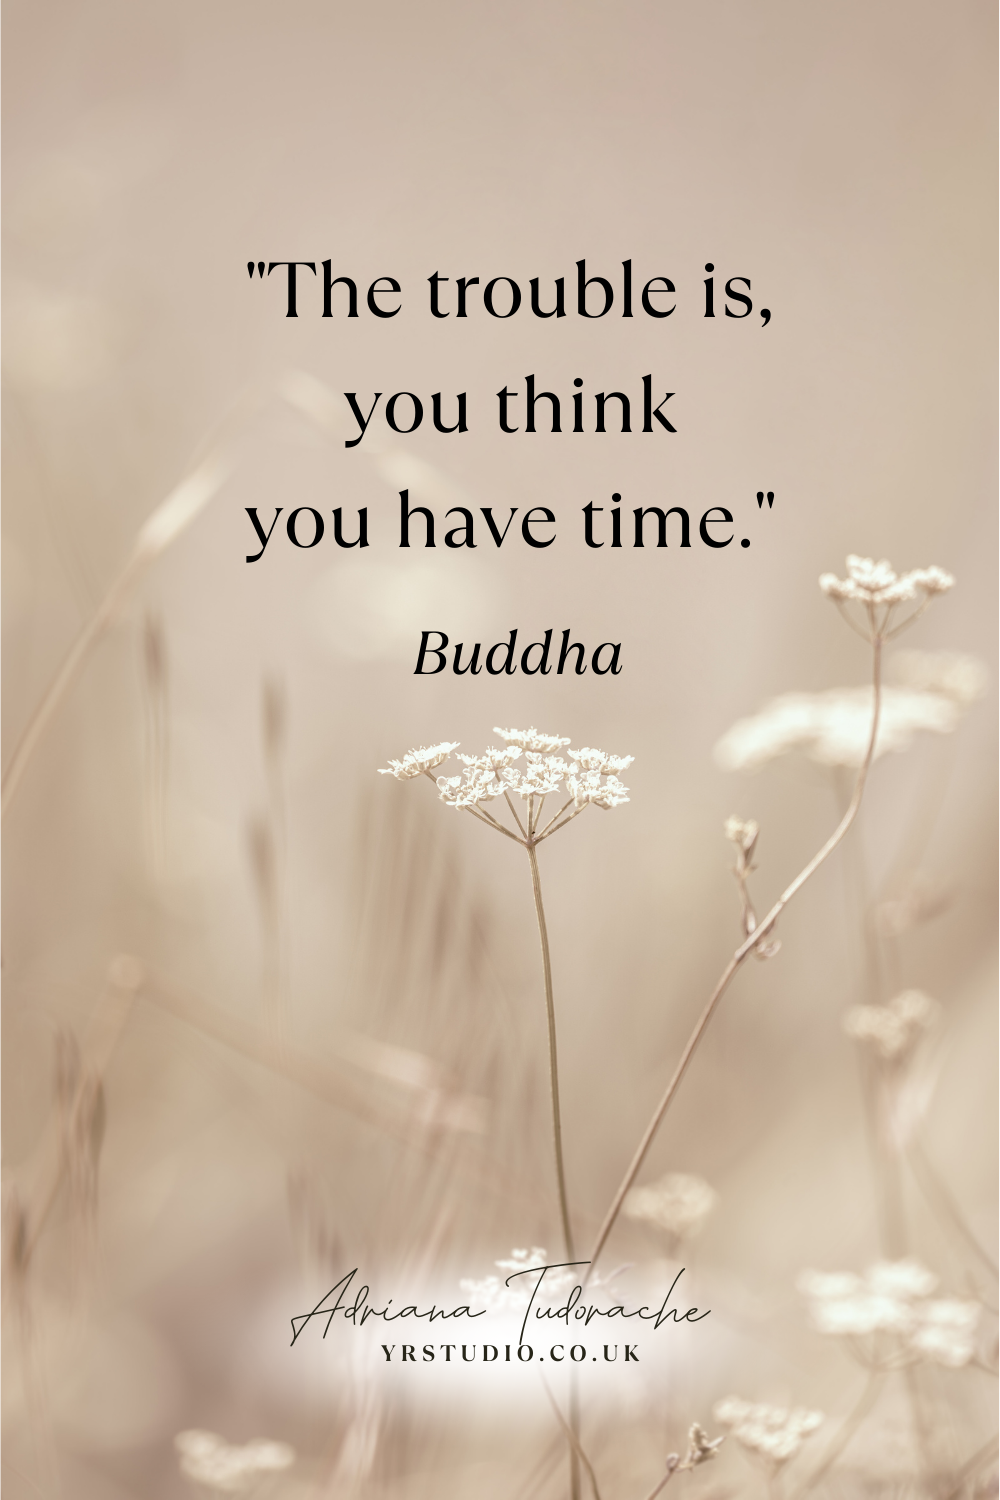 "The trouble is, you think you have time." - Buddha